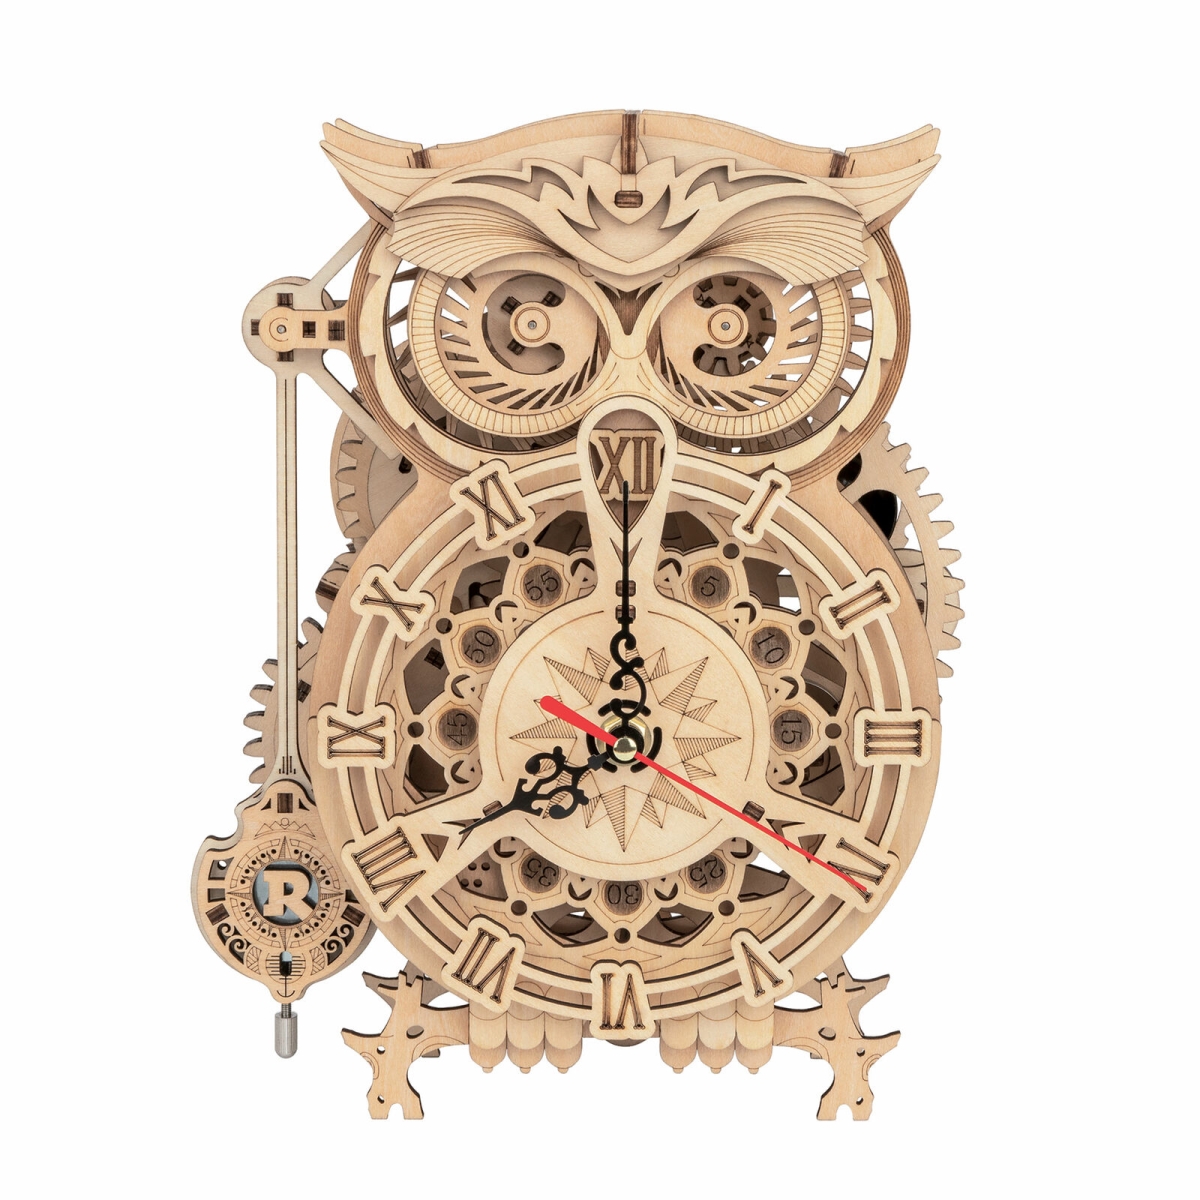 Picture of Wooden Owl Clock  -  ROKR 3D Wooden Puzzle Clock with Timer  -  DIY Mechnical Clock Building Set  Brain Teaser Unique Gift for Adult and Teenagers 14+